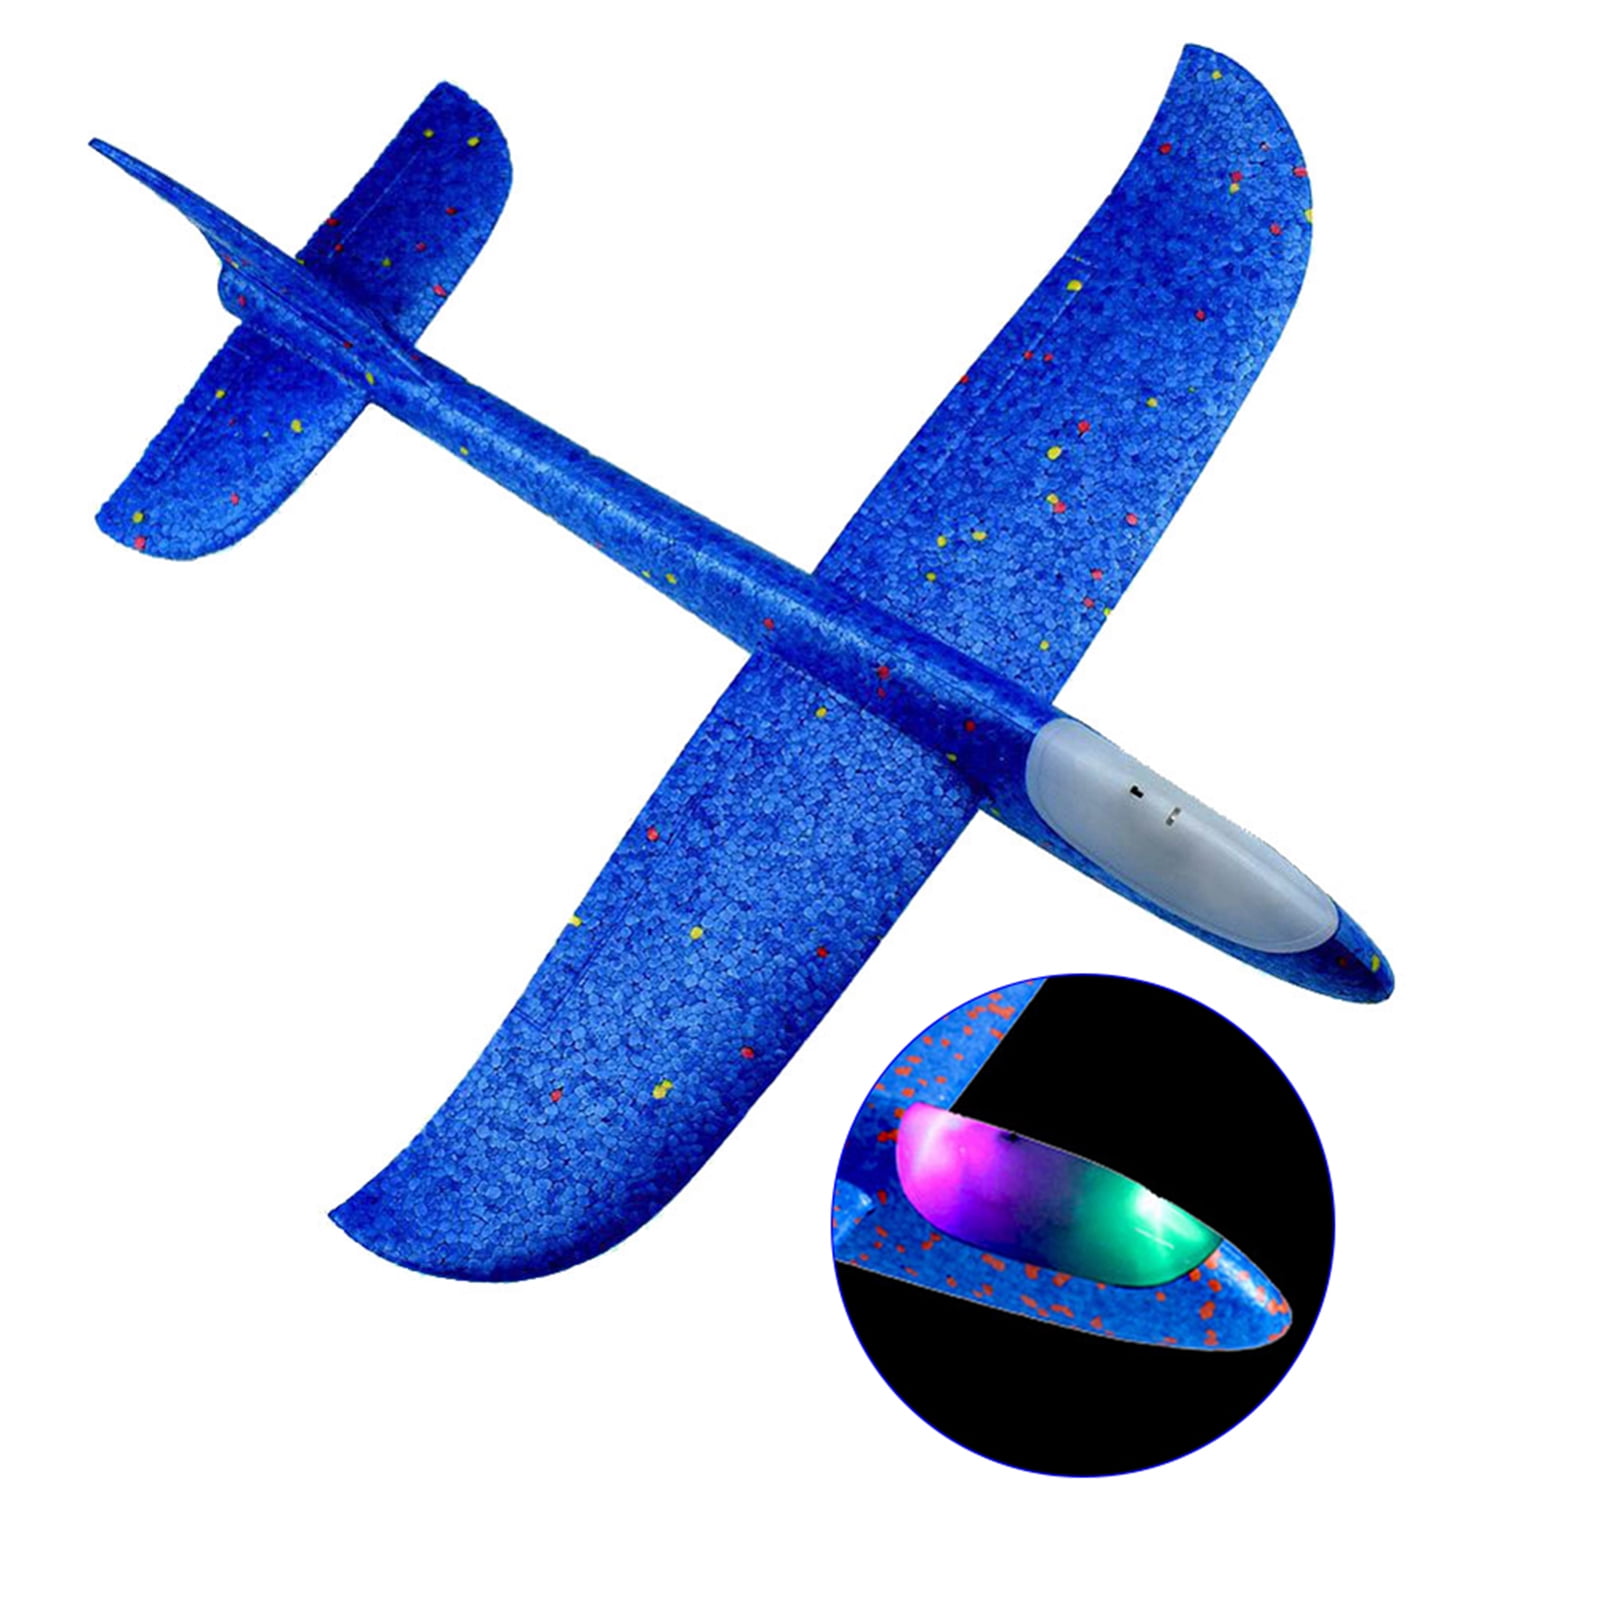 Blue Big LED Hand Launch Throwing Airplane Glider Aircraft Inertial Foam EPP Toy Children Adults Plane Model Airplane Toy